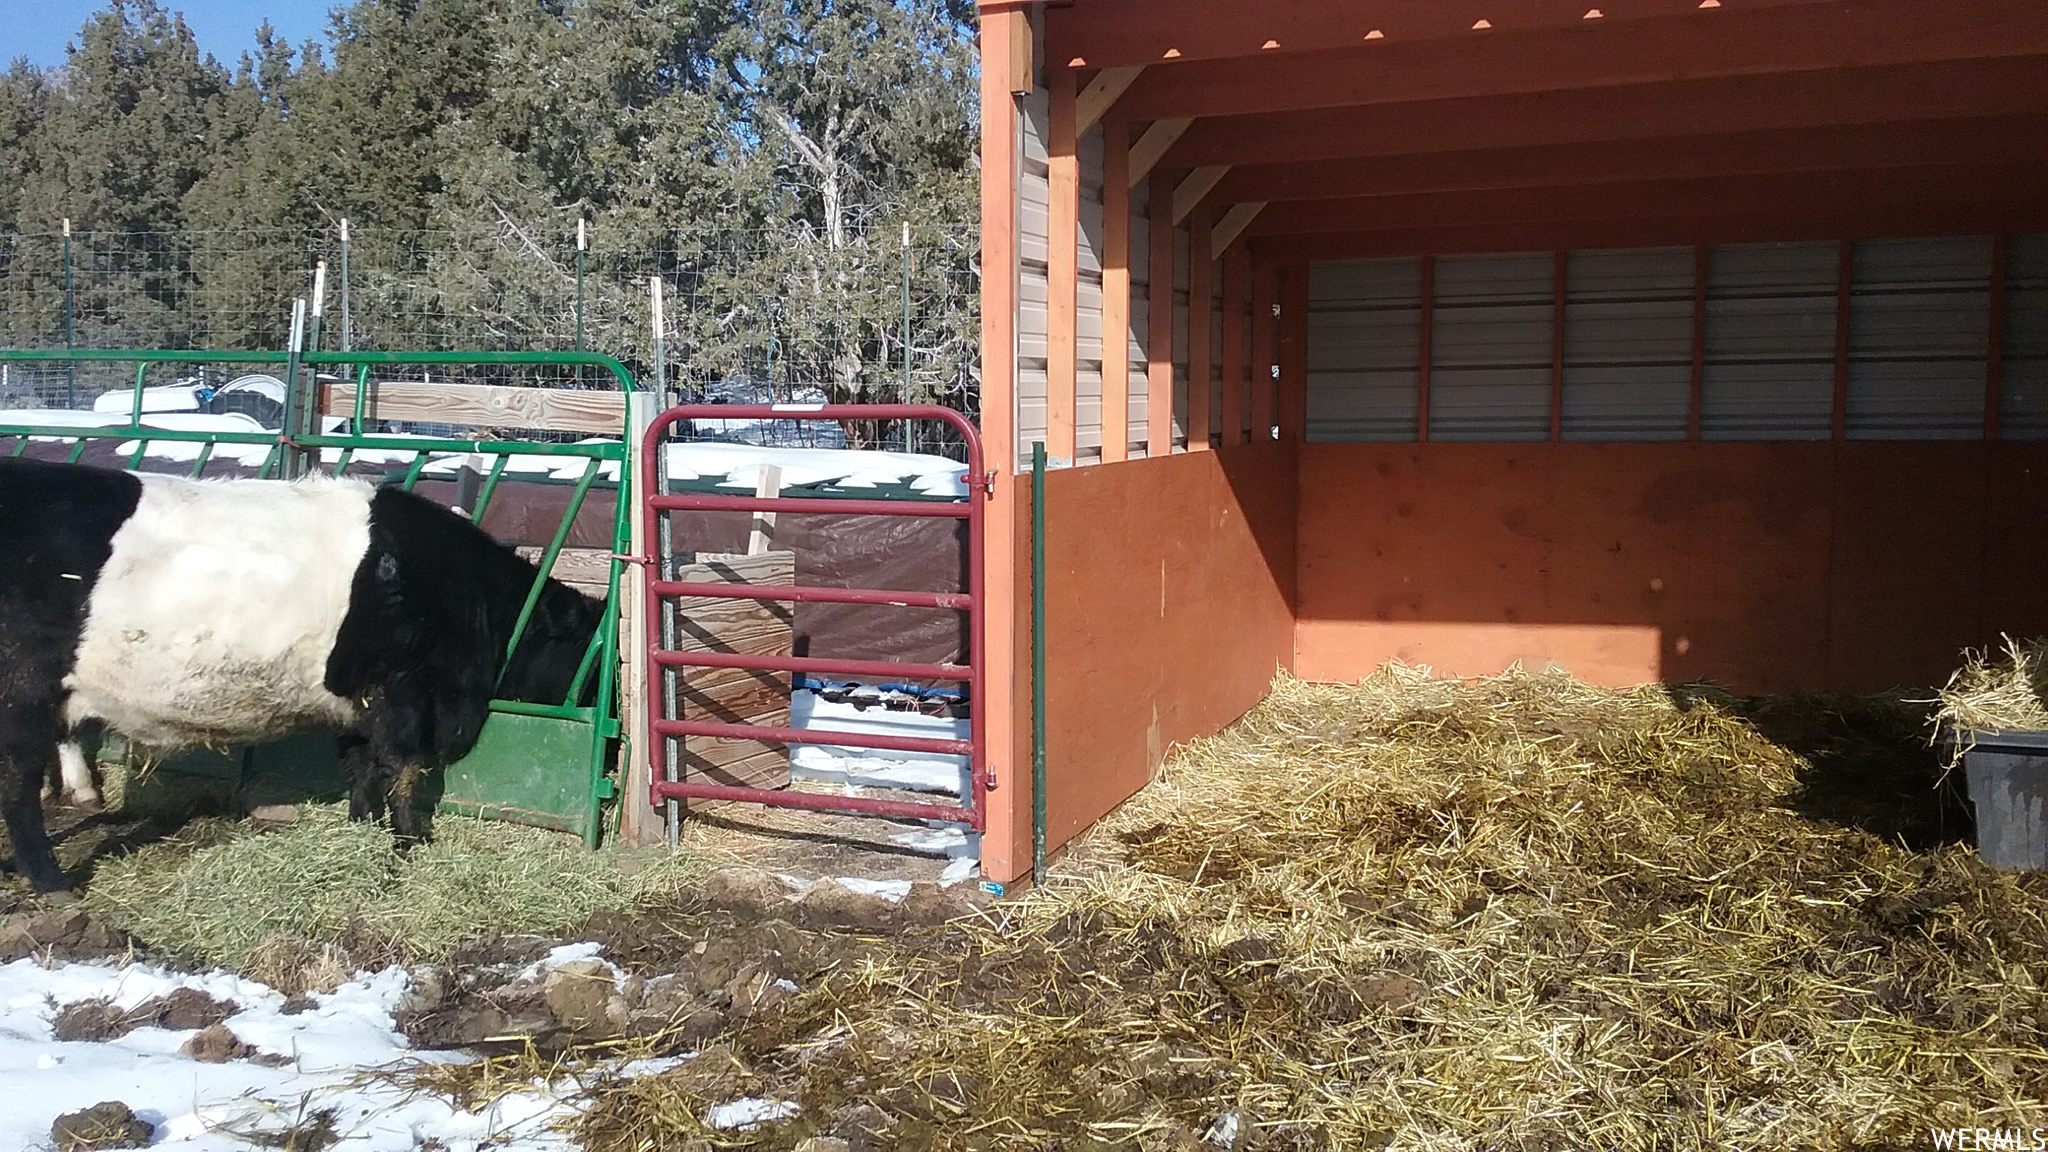 Cow corral and shed